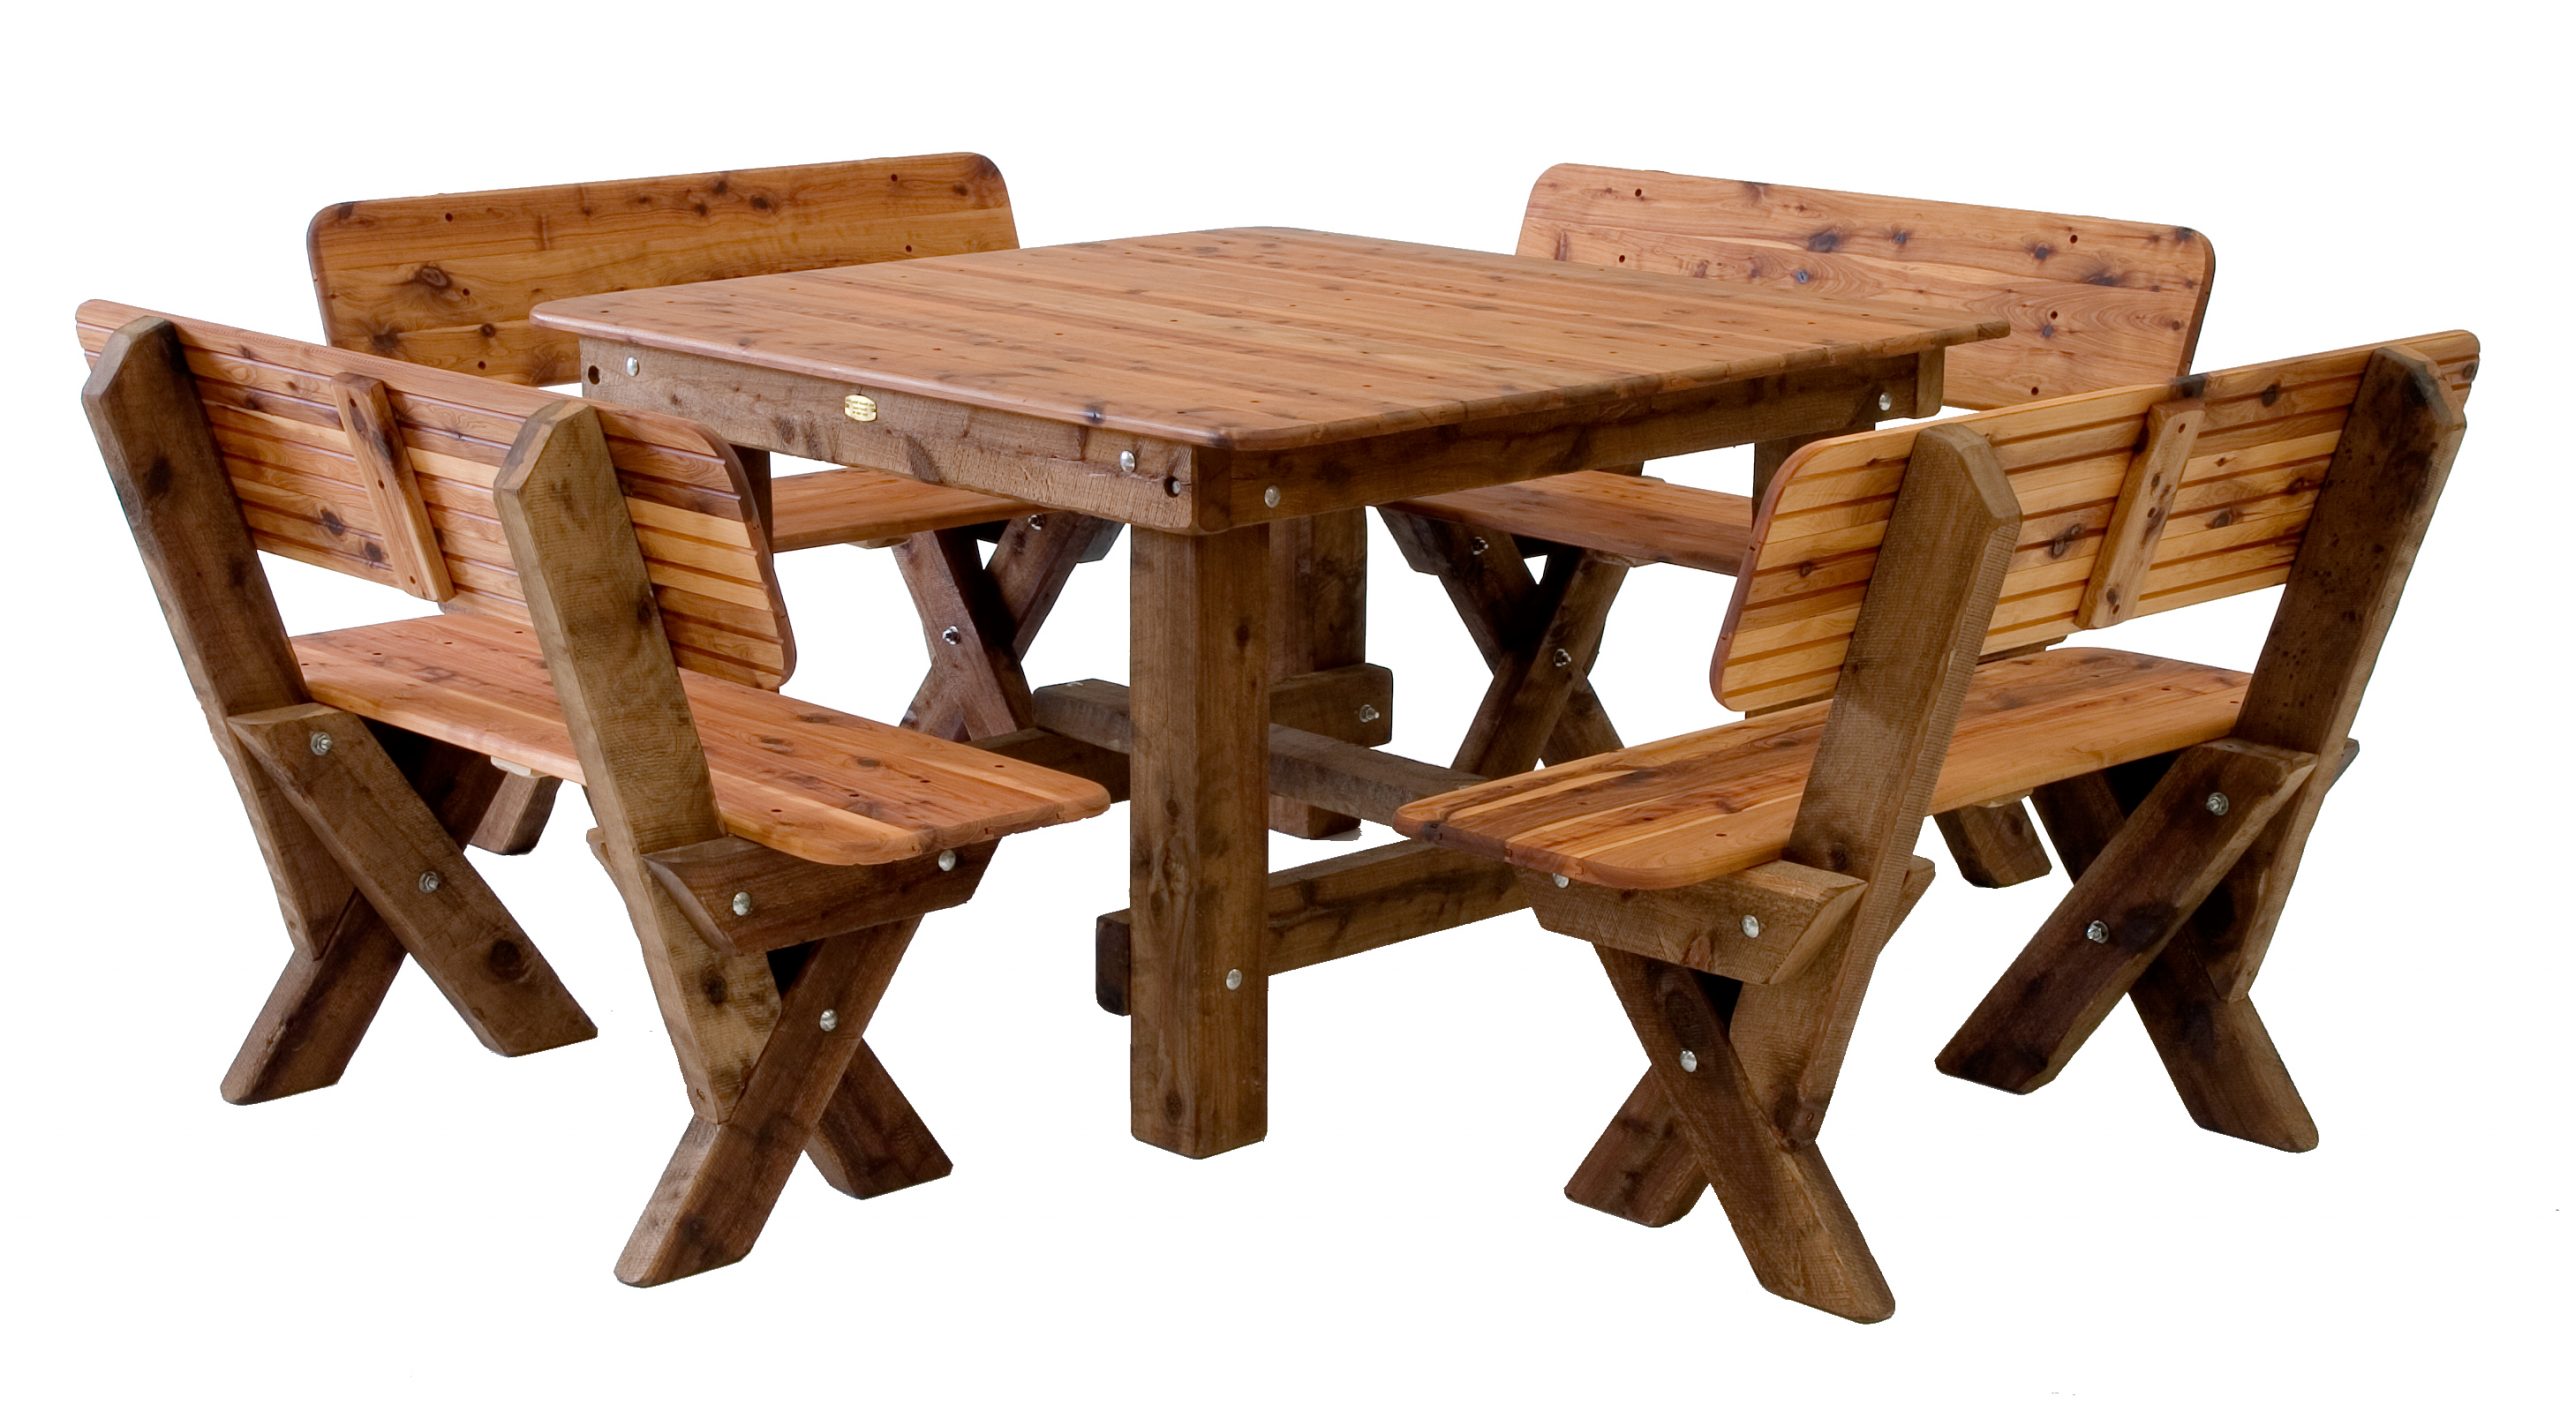 Southport 1200 High Back Cypress outdoor timber setting available to order now